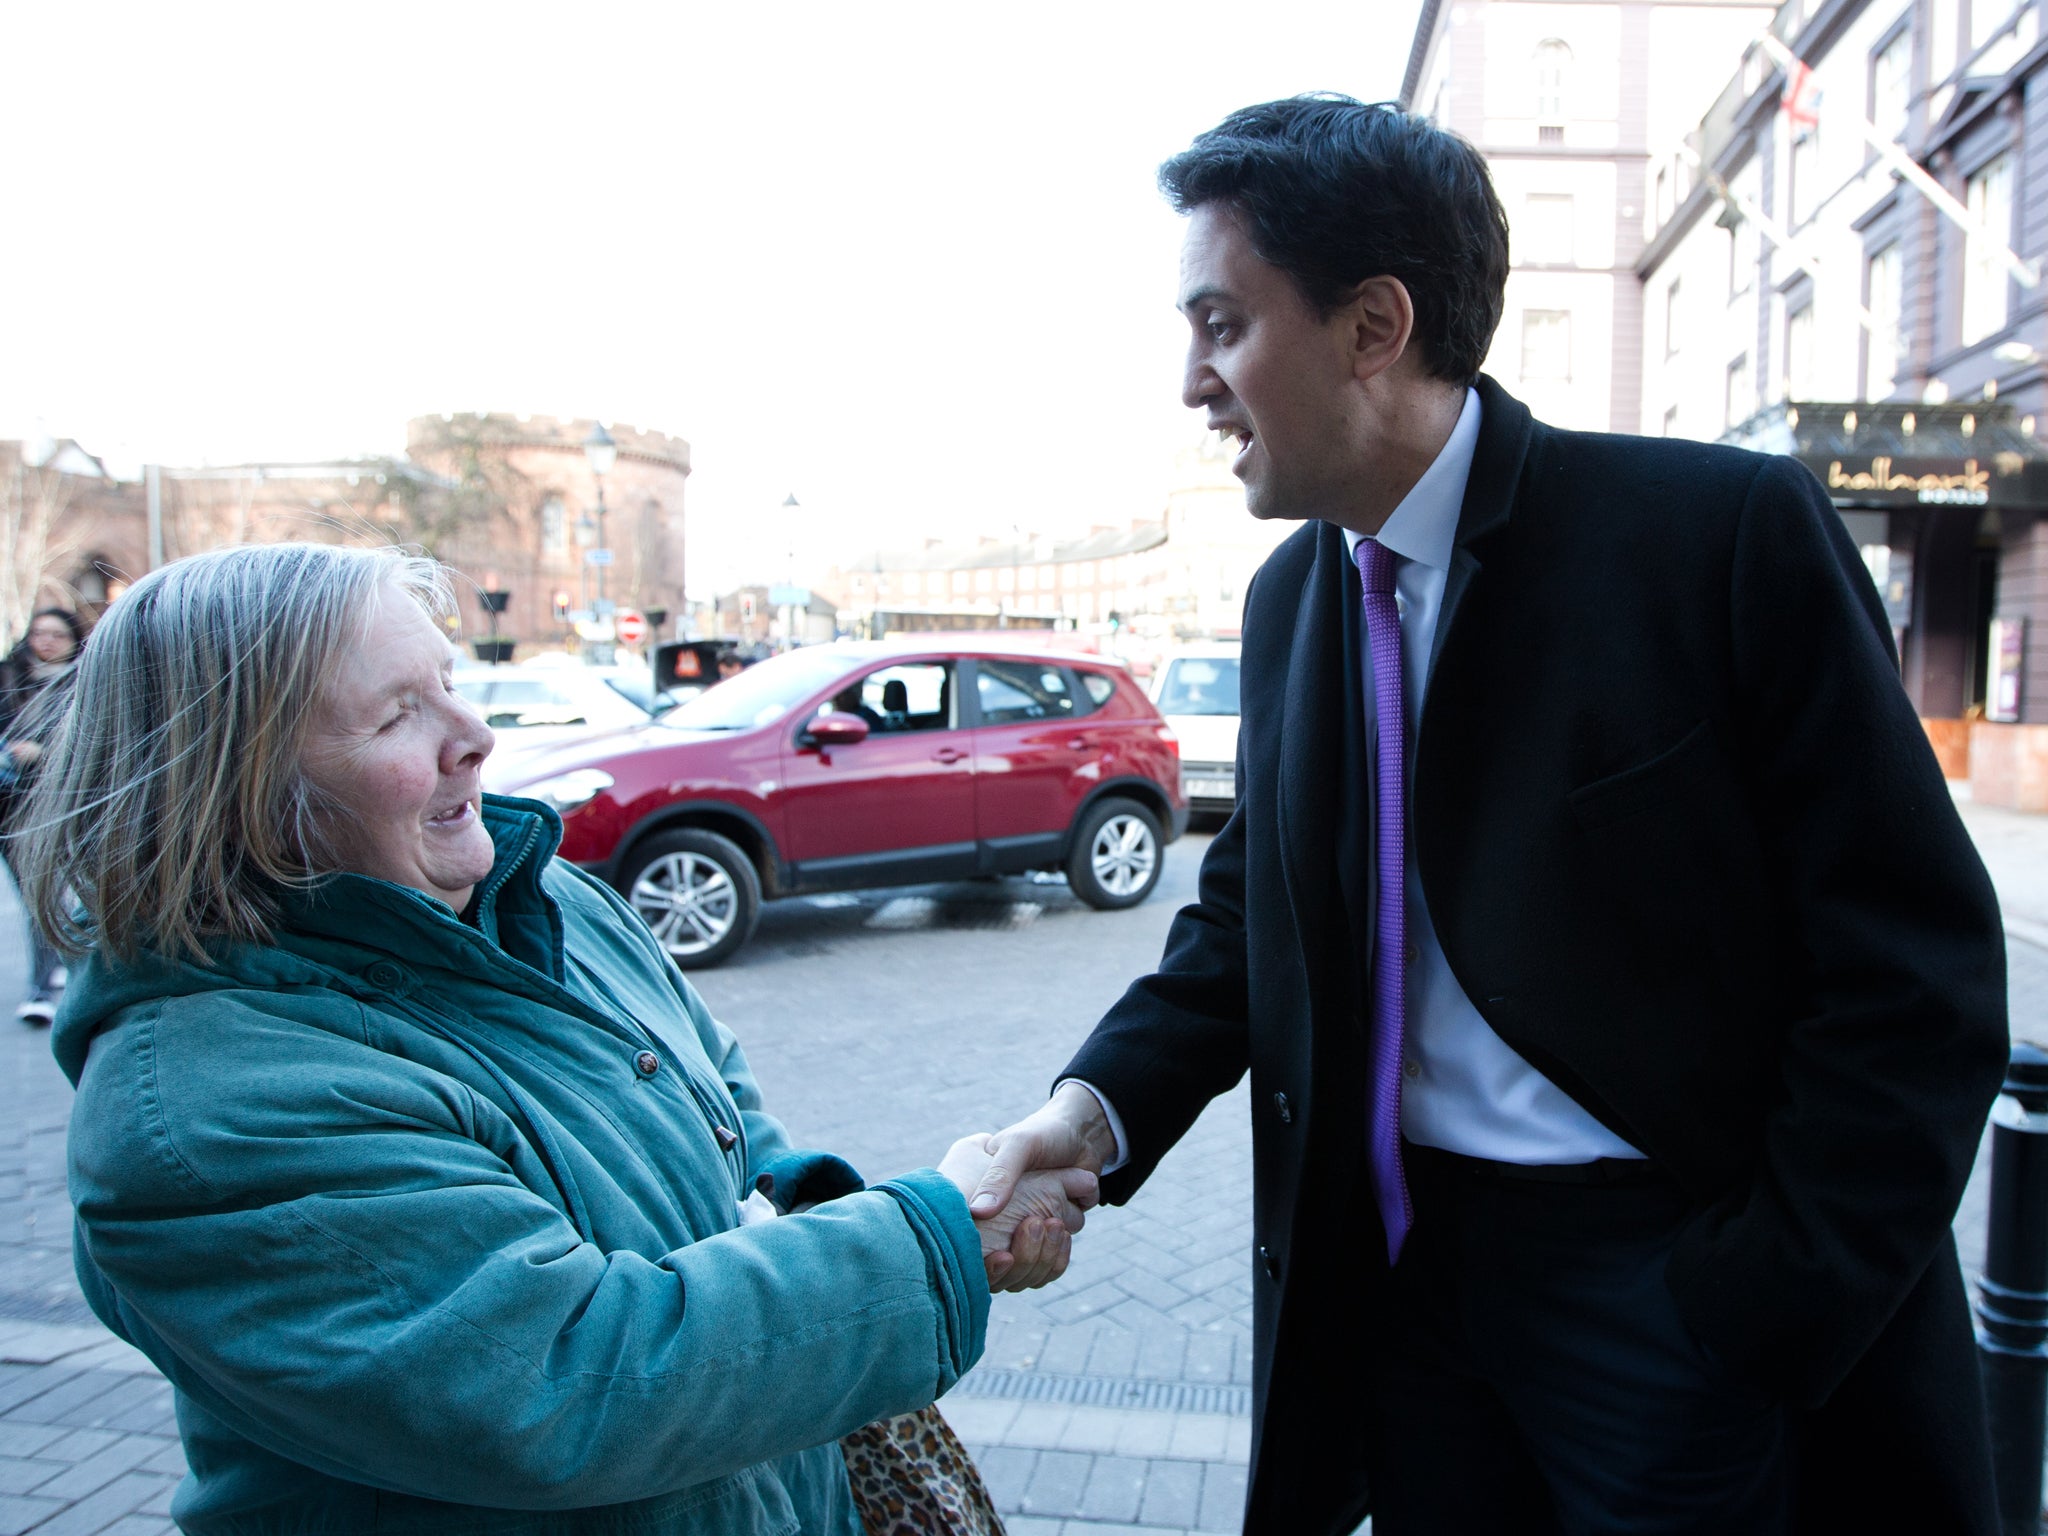 Ed Miliband at the town’s railway station